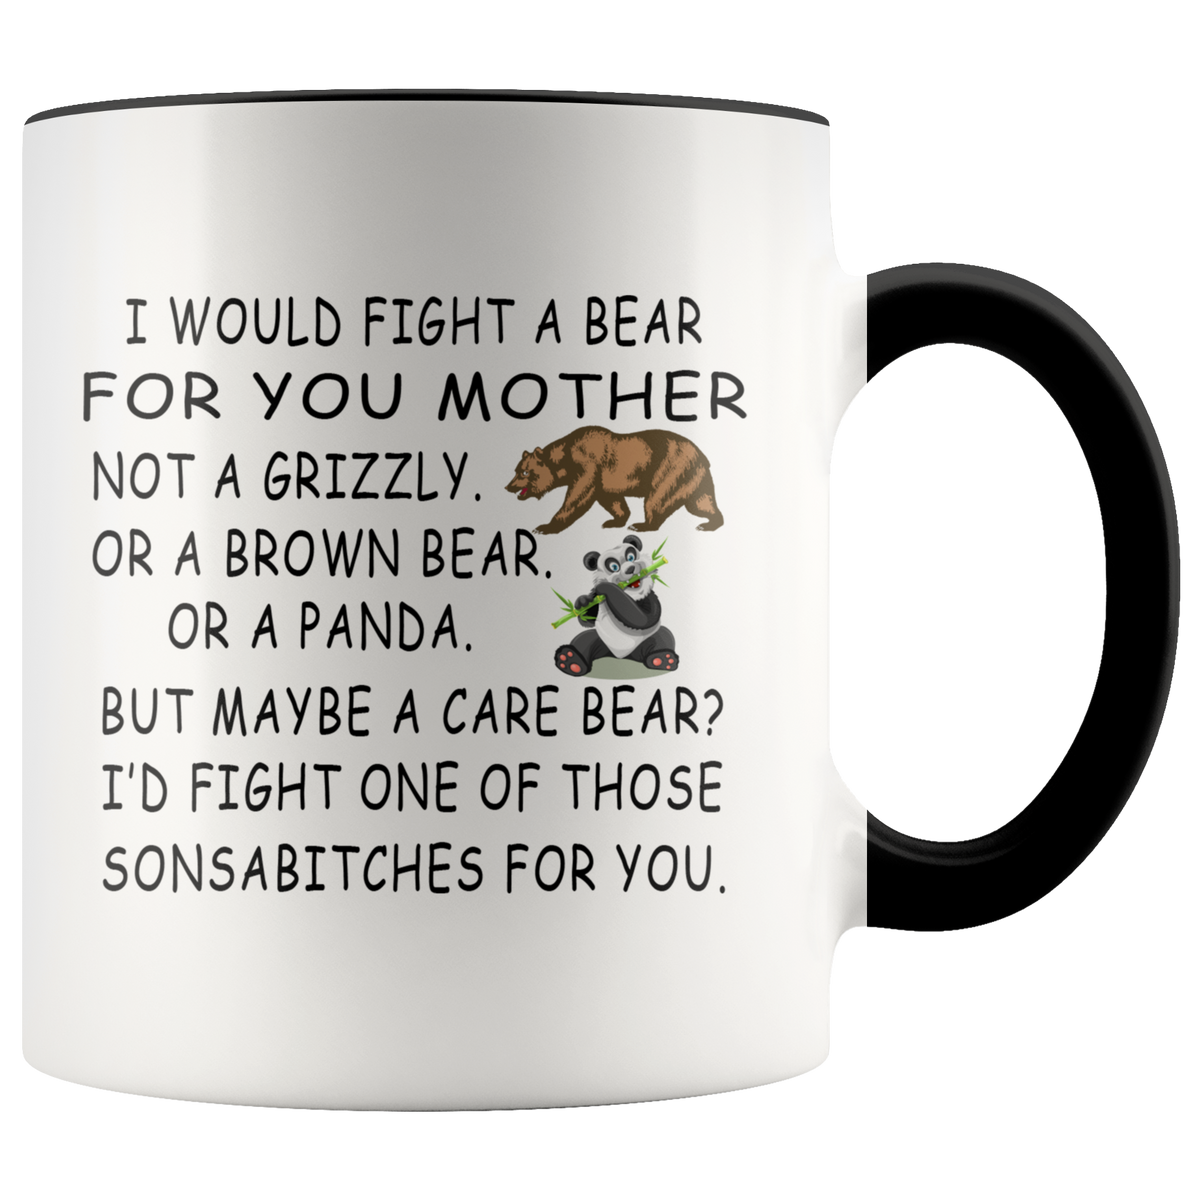 Funny Mug Gift For Mom - I Would Fight A Bear For You Mother Accent Coffee Mug, Birthday Christmas Gift For Mom